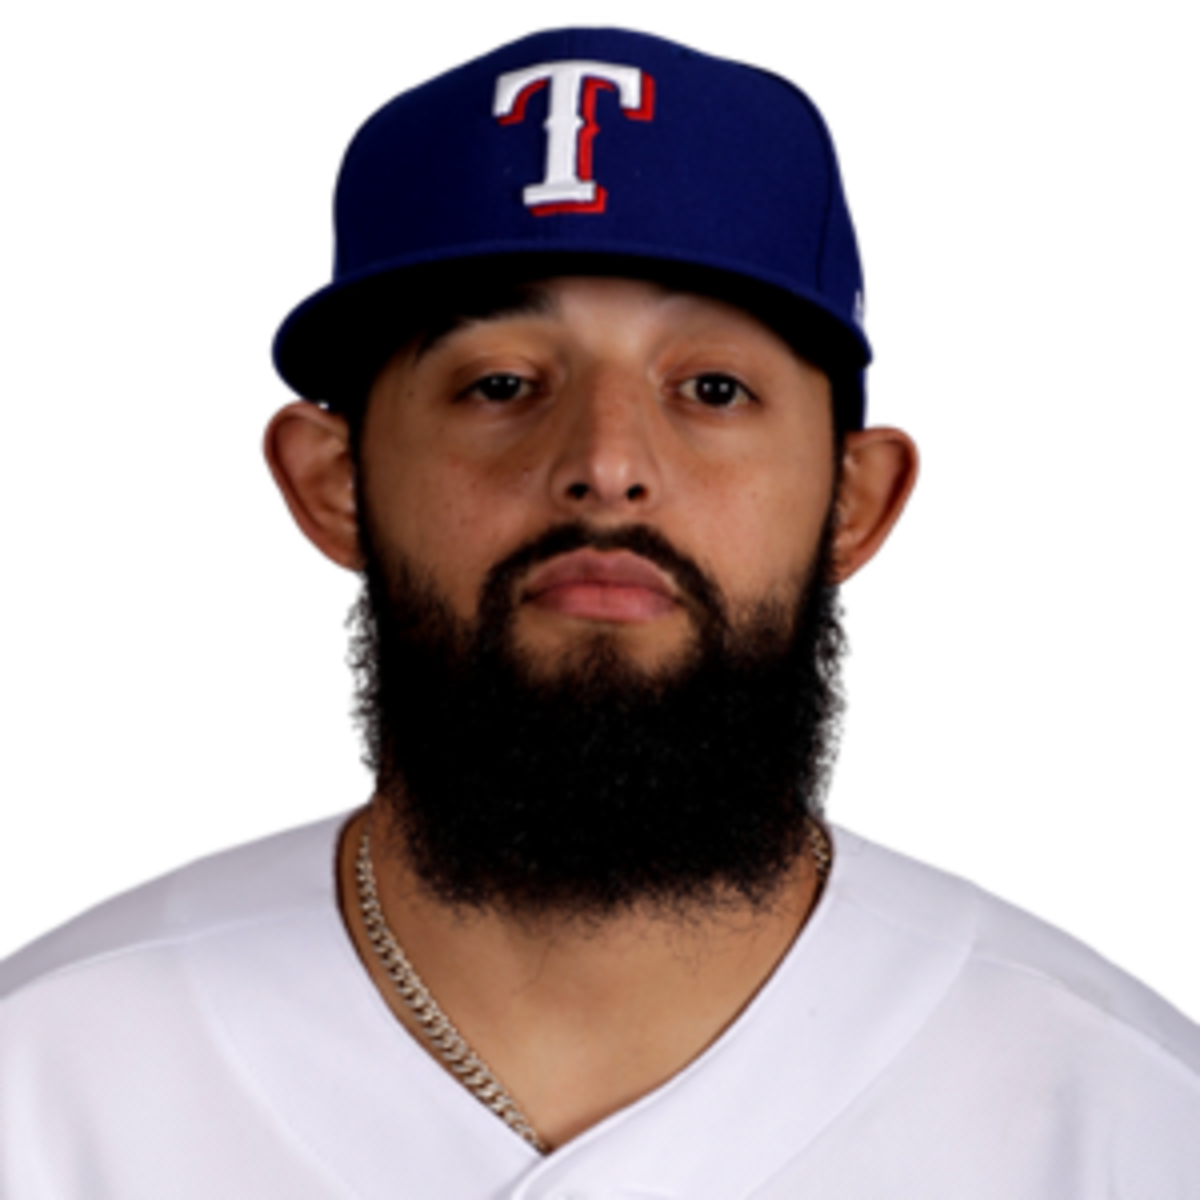 rougned odor stats